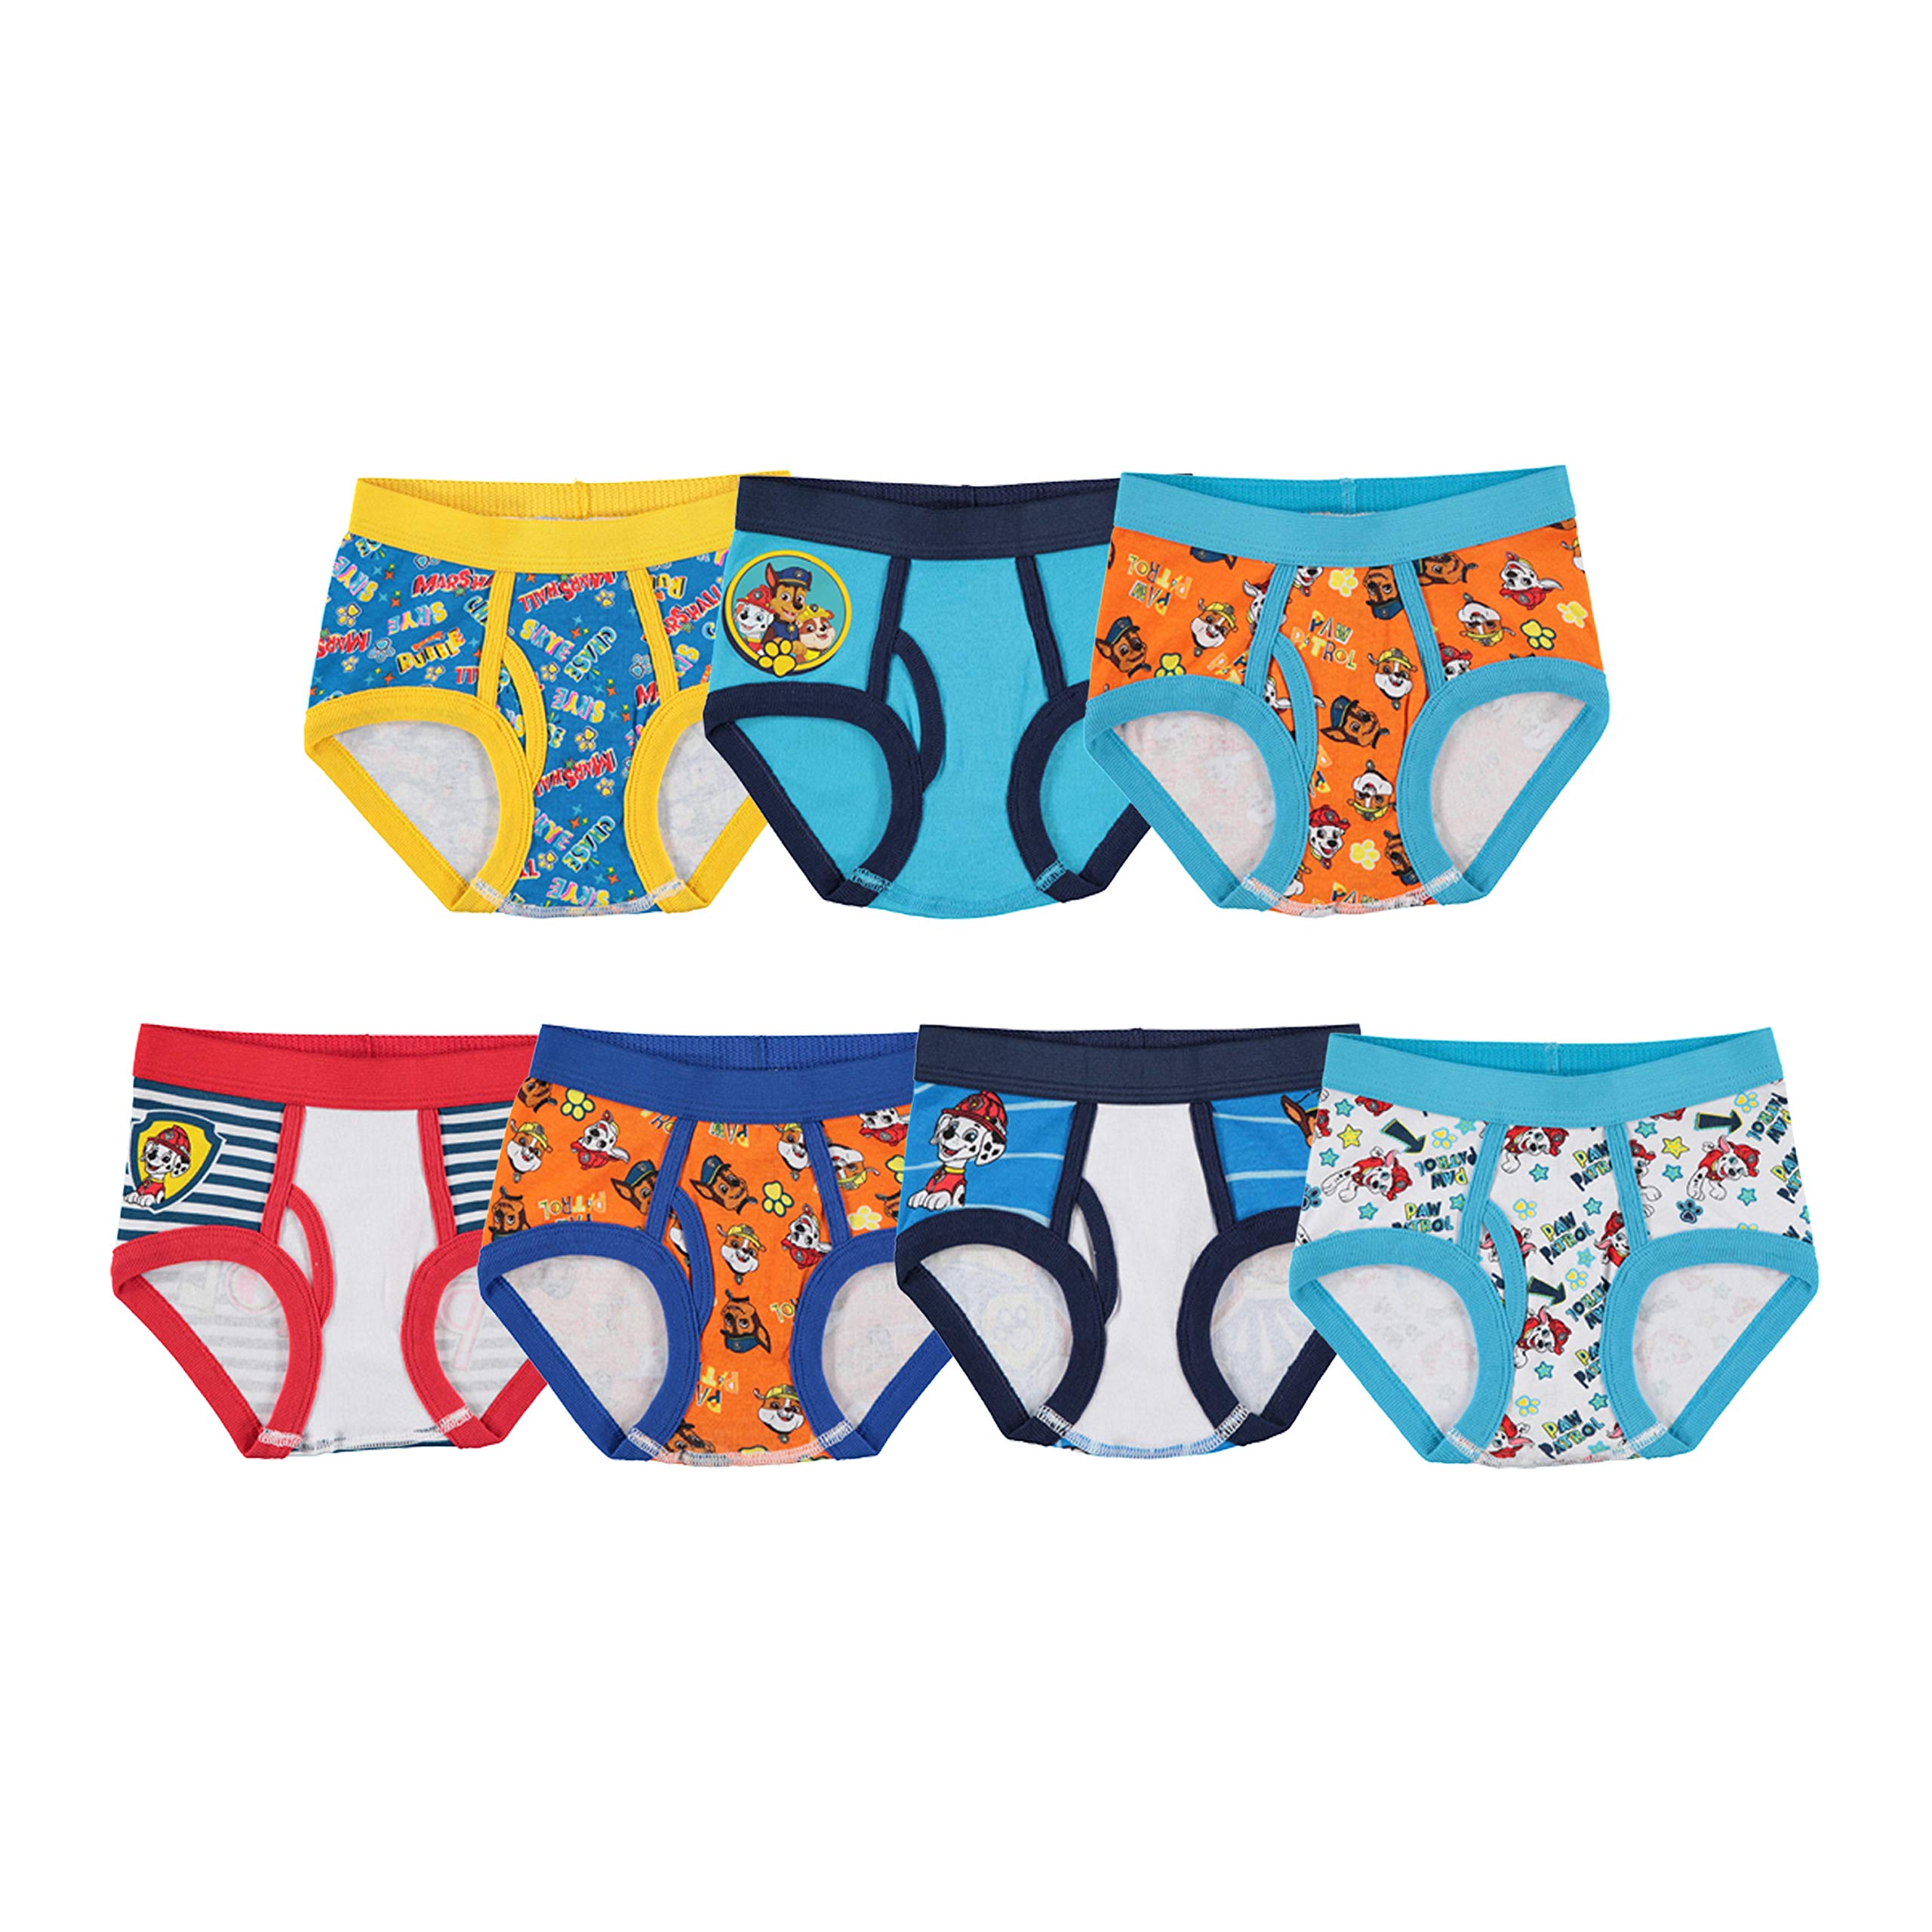 Paw Patrol Boys' 100% Combed Cotton Underwear 5-10packs Available with Chase, Skye, Rubble and More in Sizes 18m, 2/3t, 4t